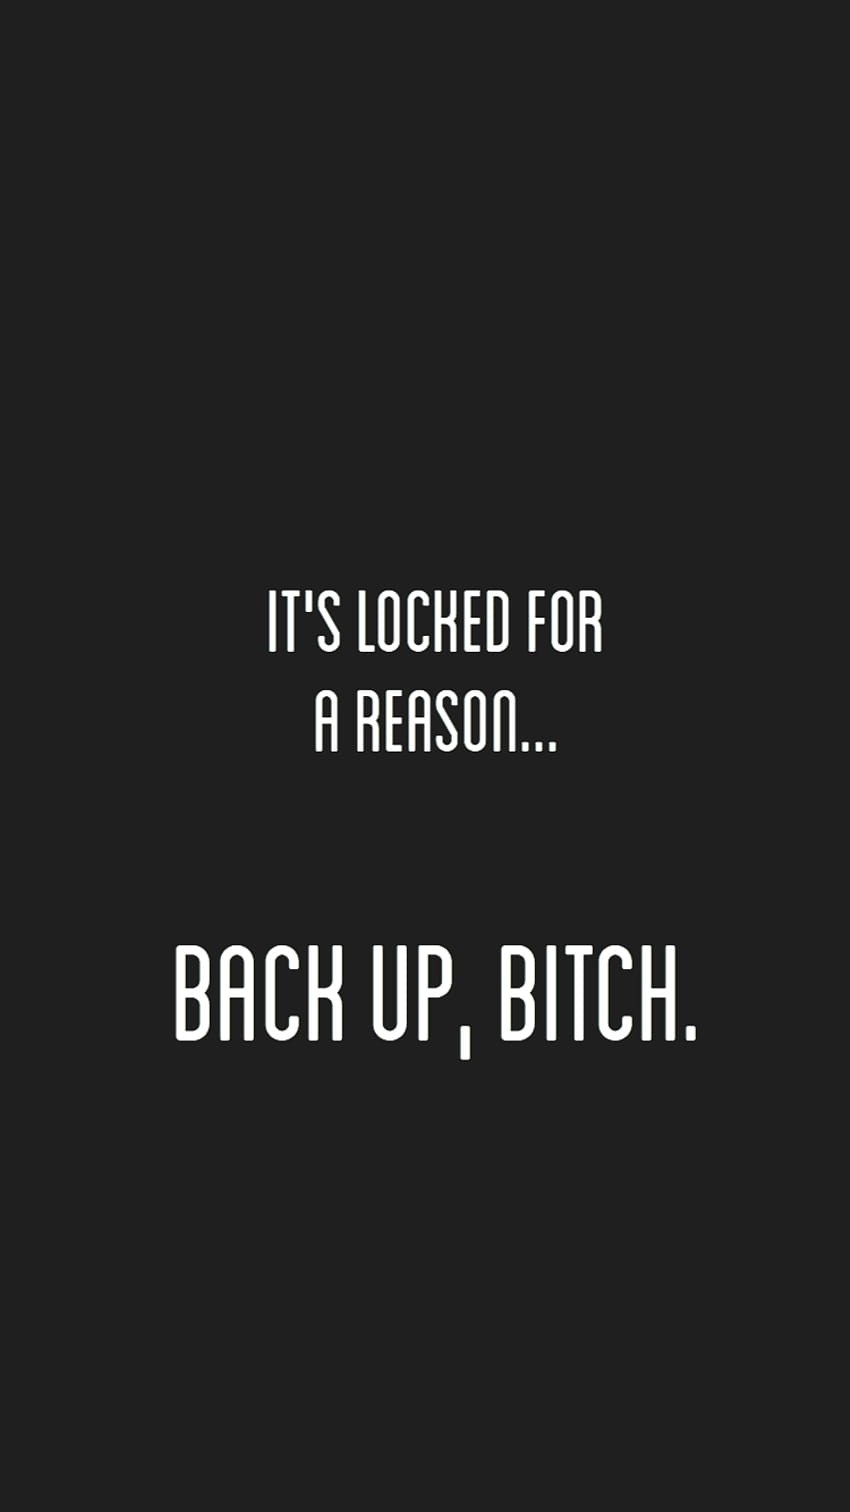 It's locked for a reason... back up bitch' . Black, its locked for a reason HD phone wallpaper